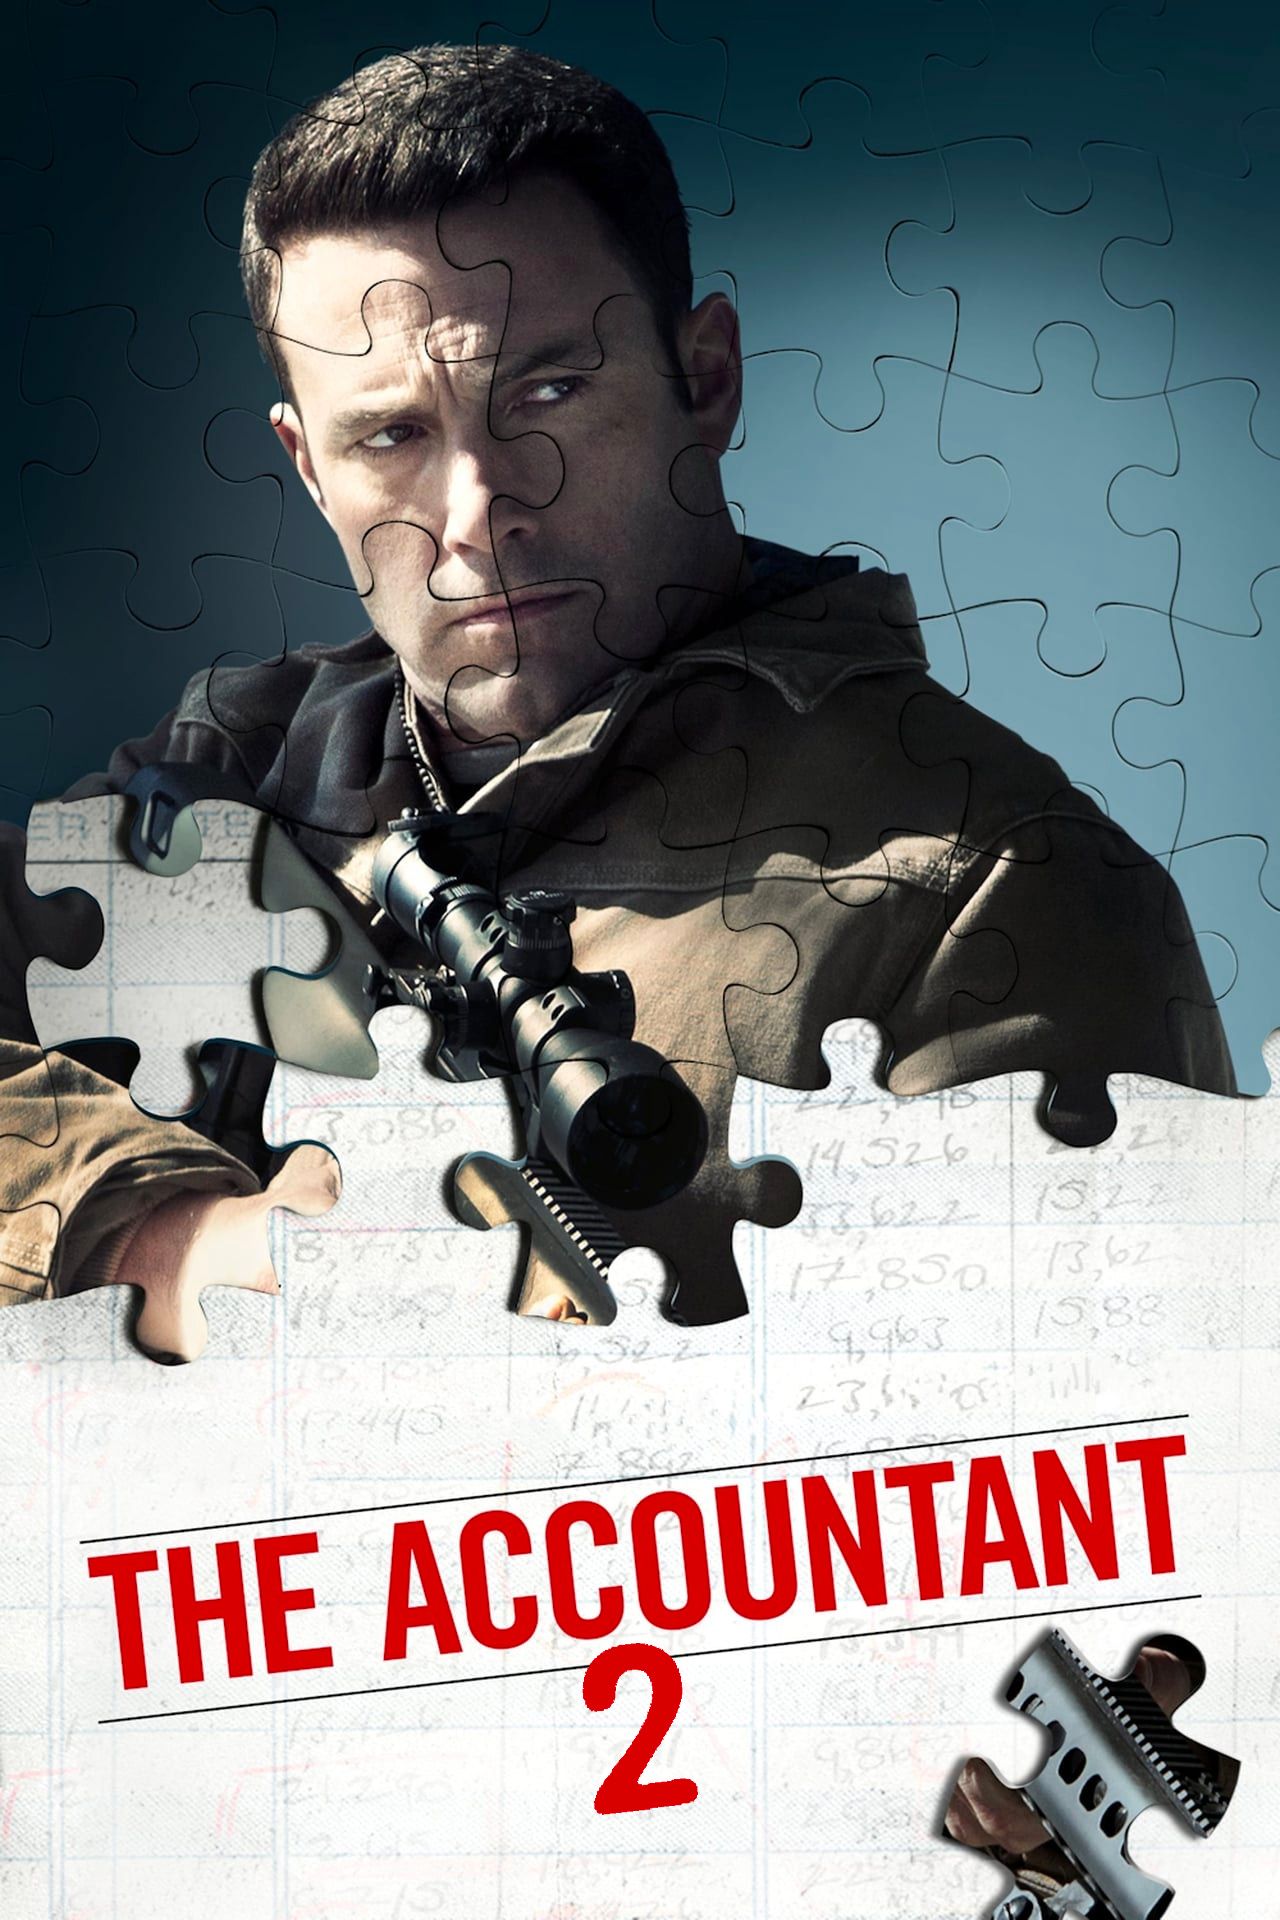 The Accountant 2 Puzzle Poster Showing Ben Affleck Holding a Gun 